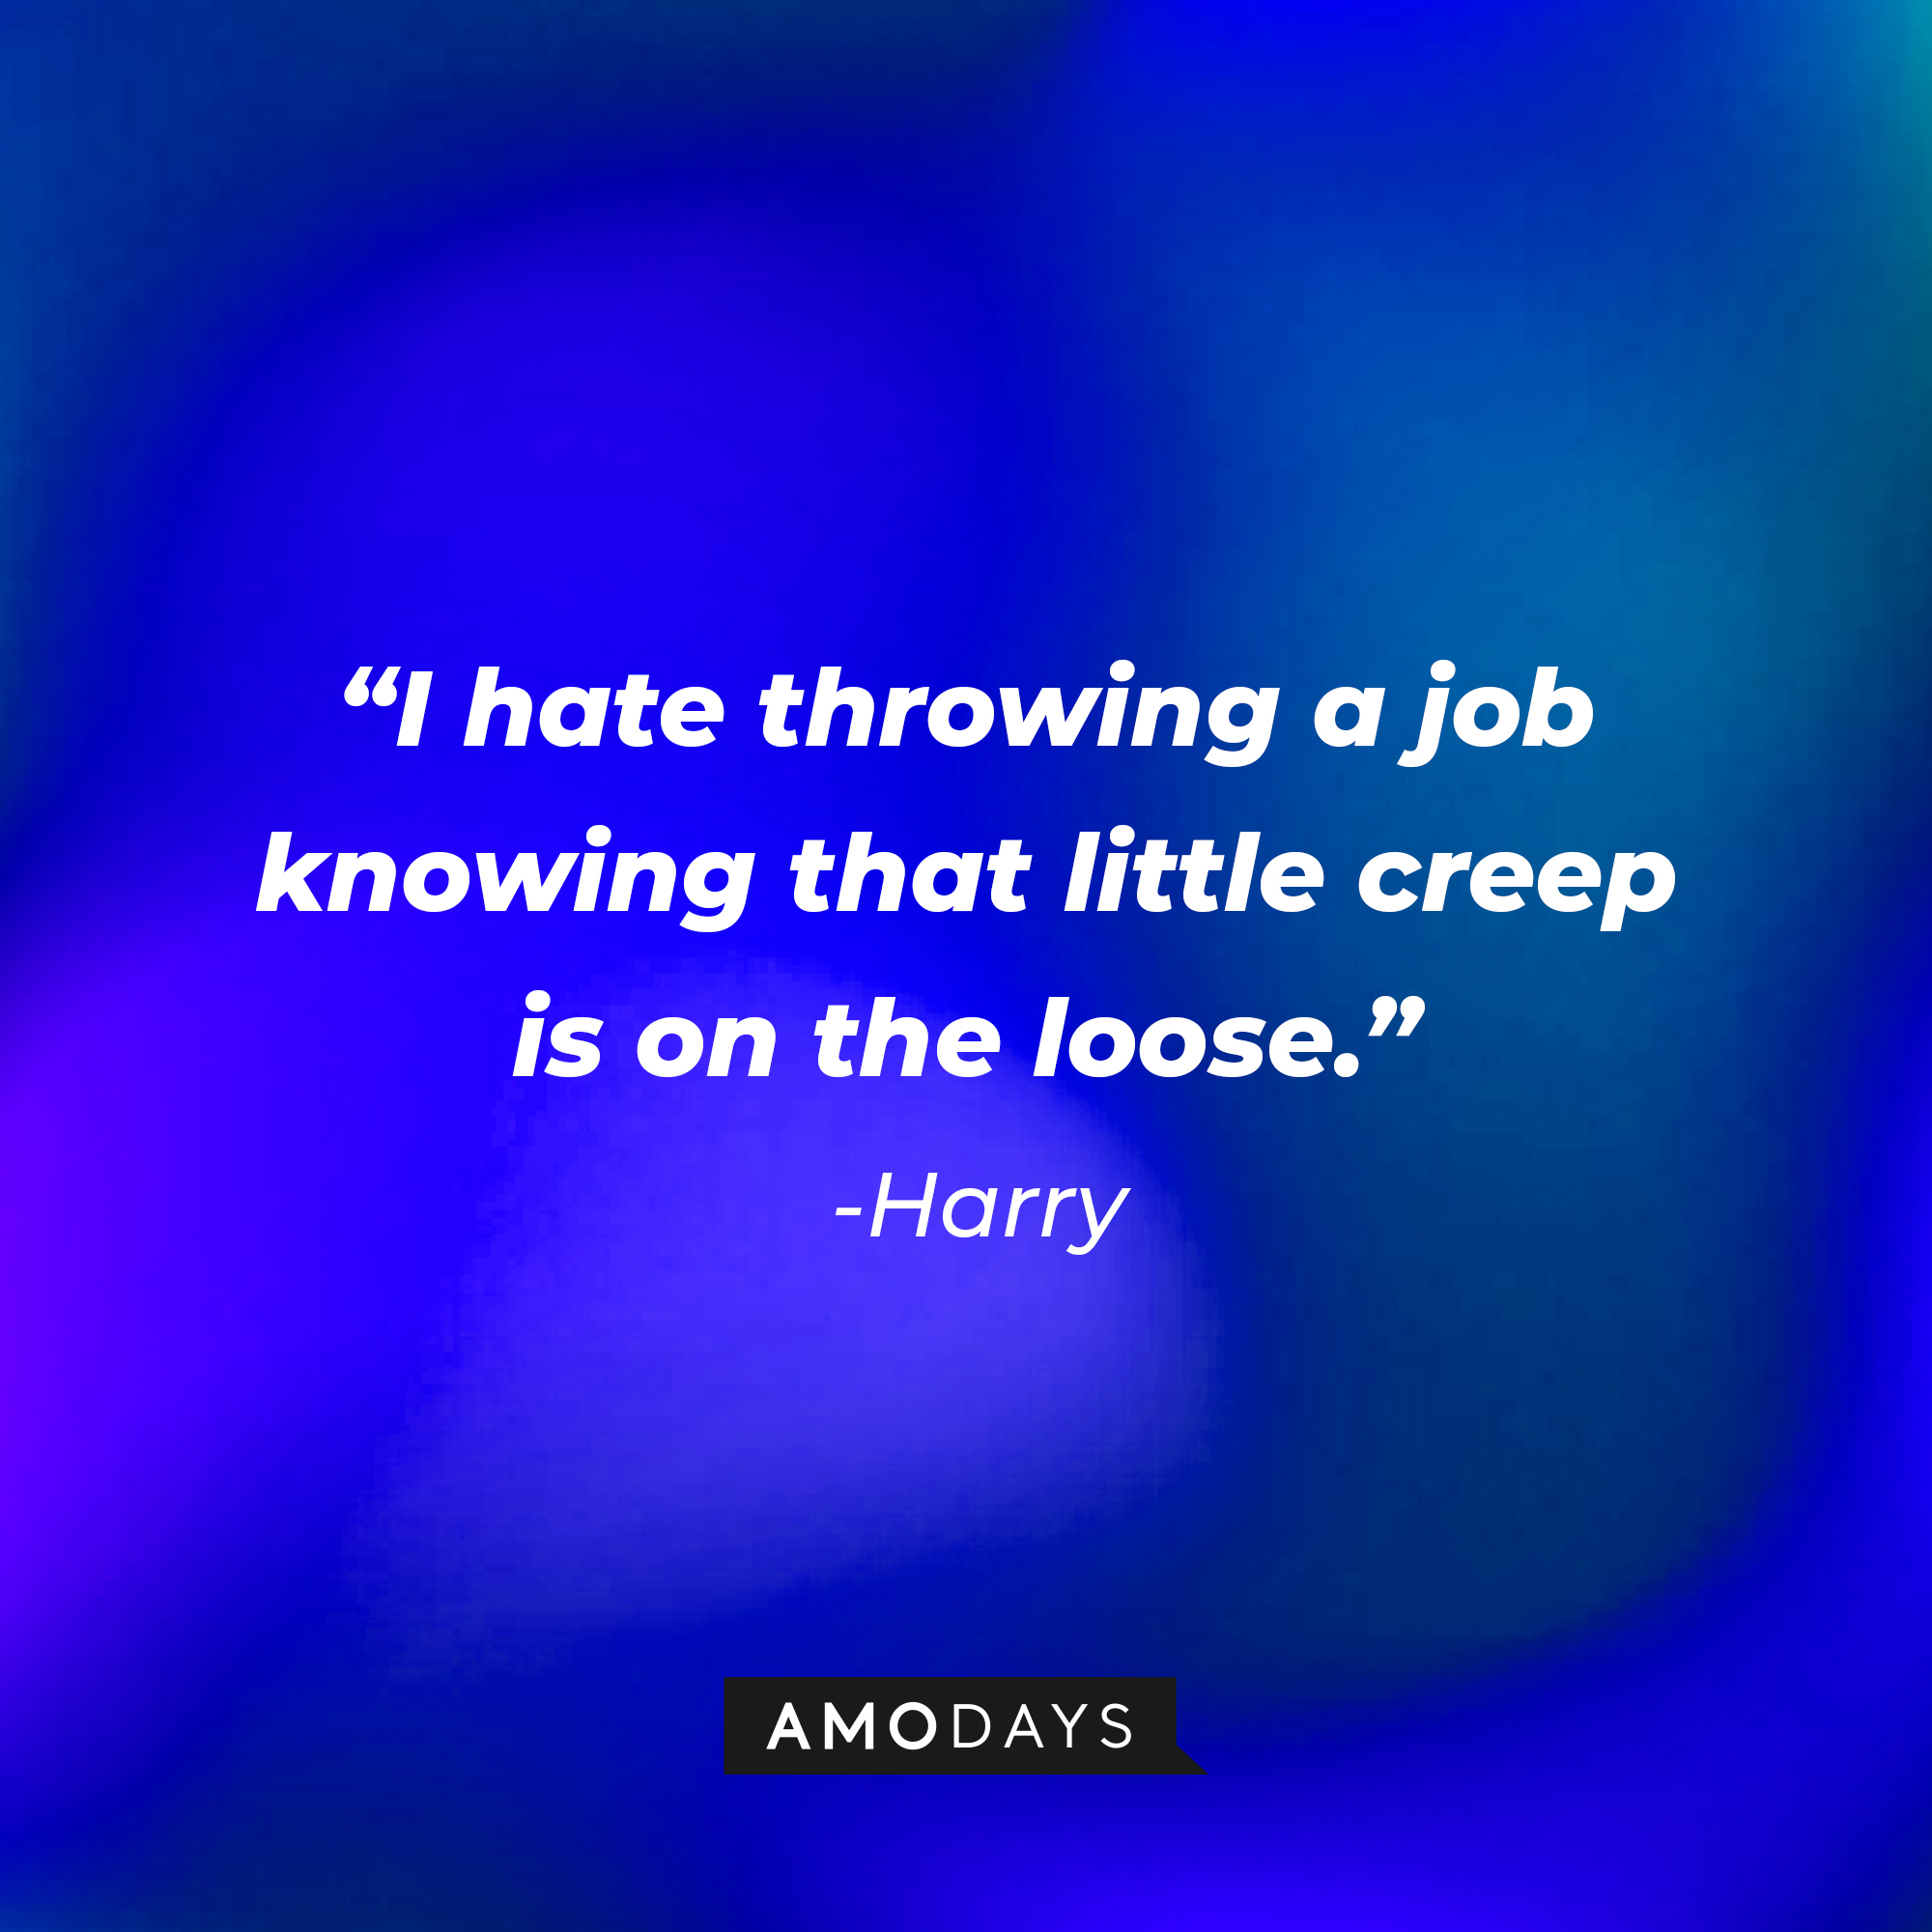 Harry's quote: "I hate throwing a job knowing that little creep is on the loose." | Source: AmoDays